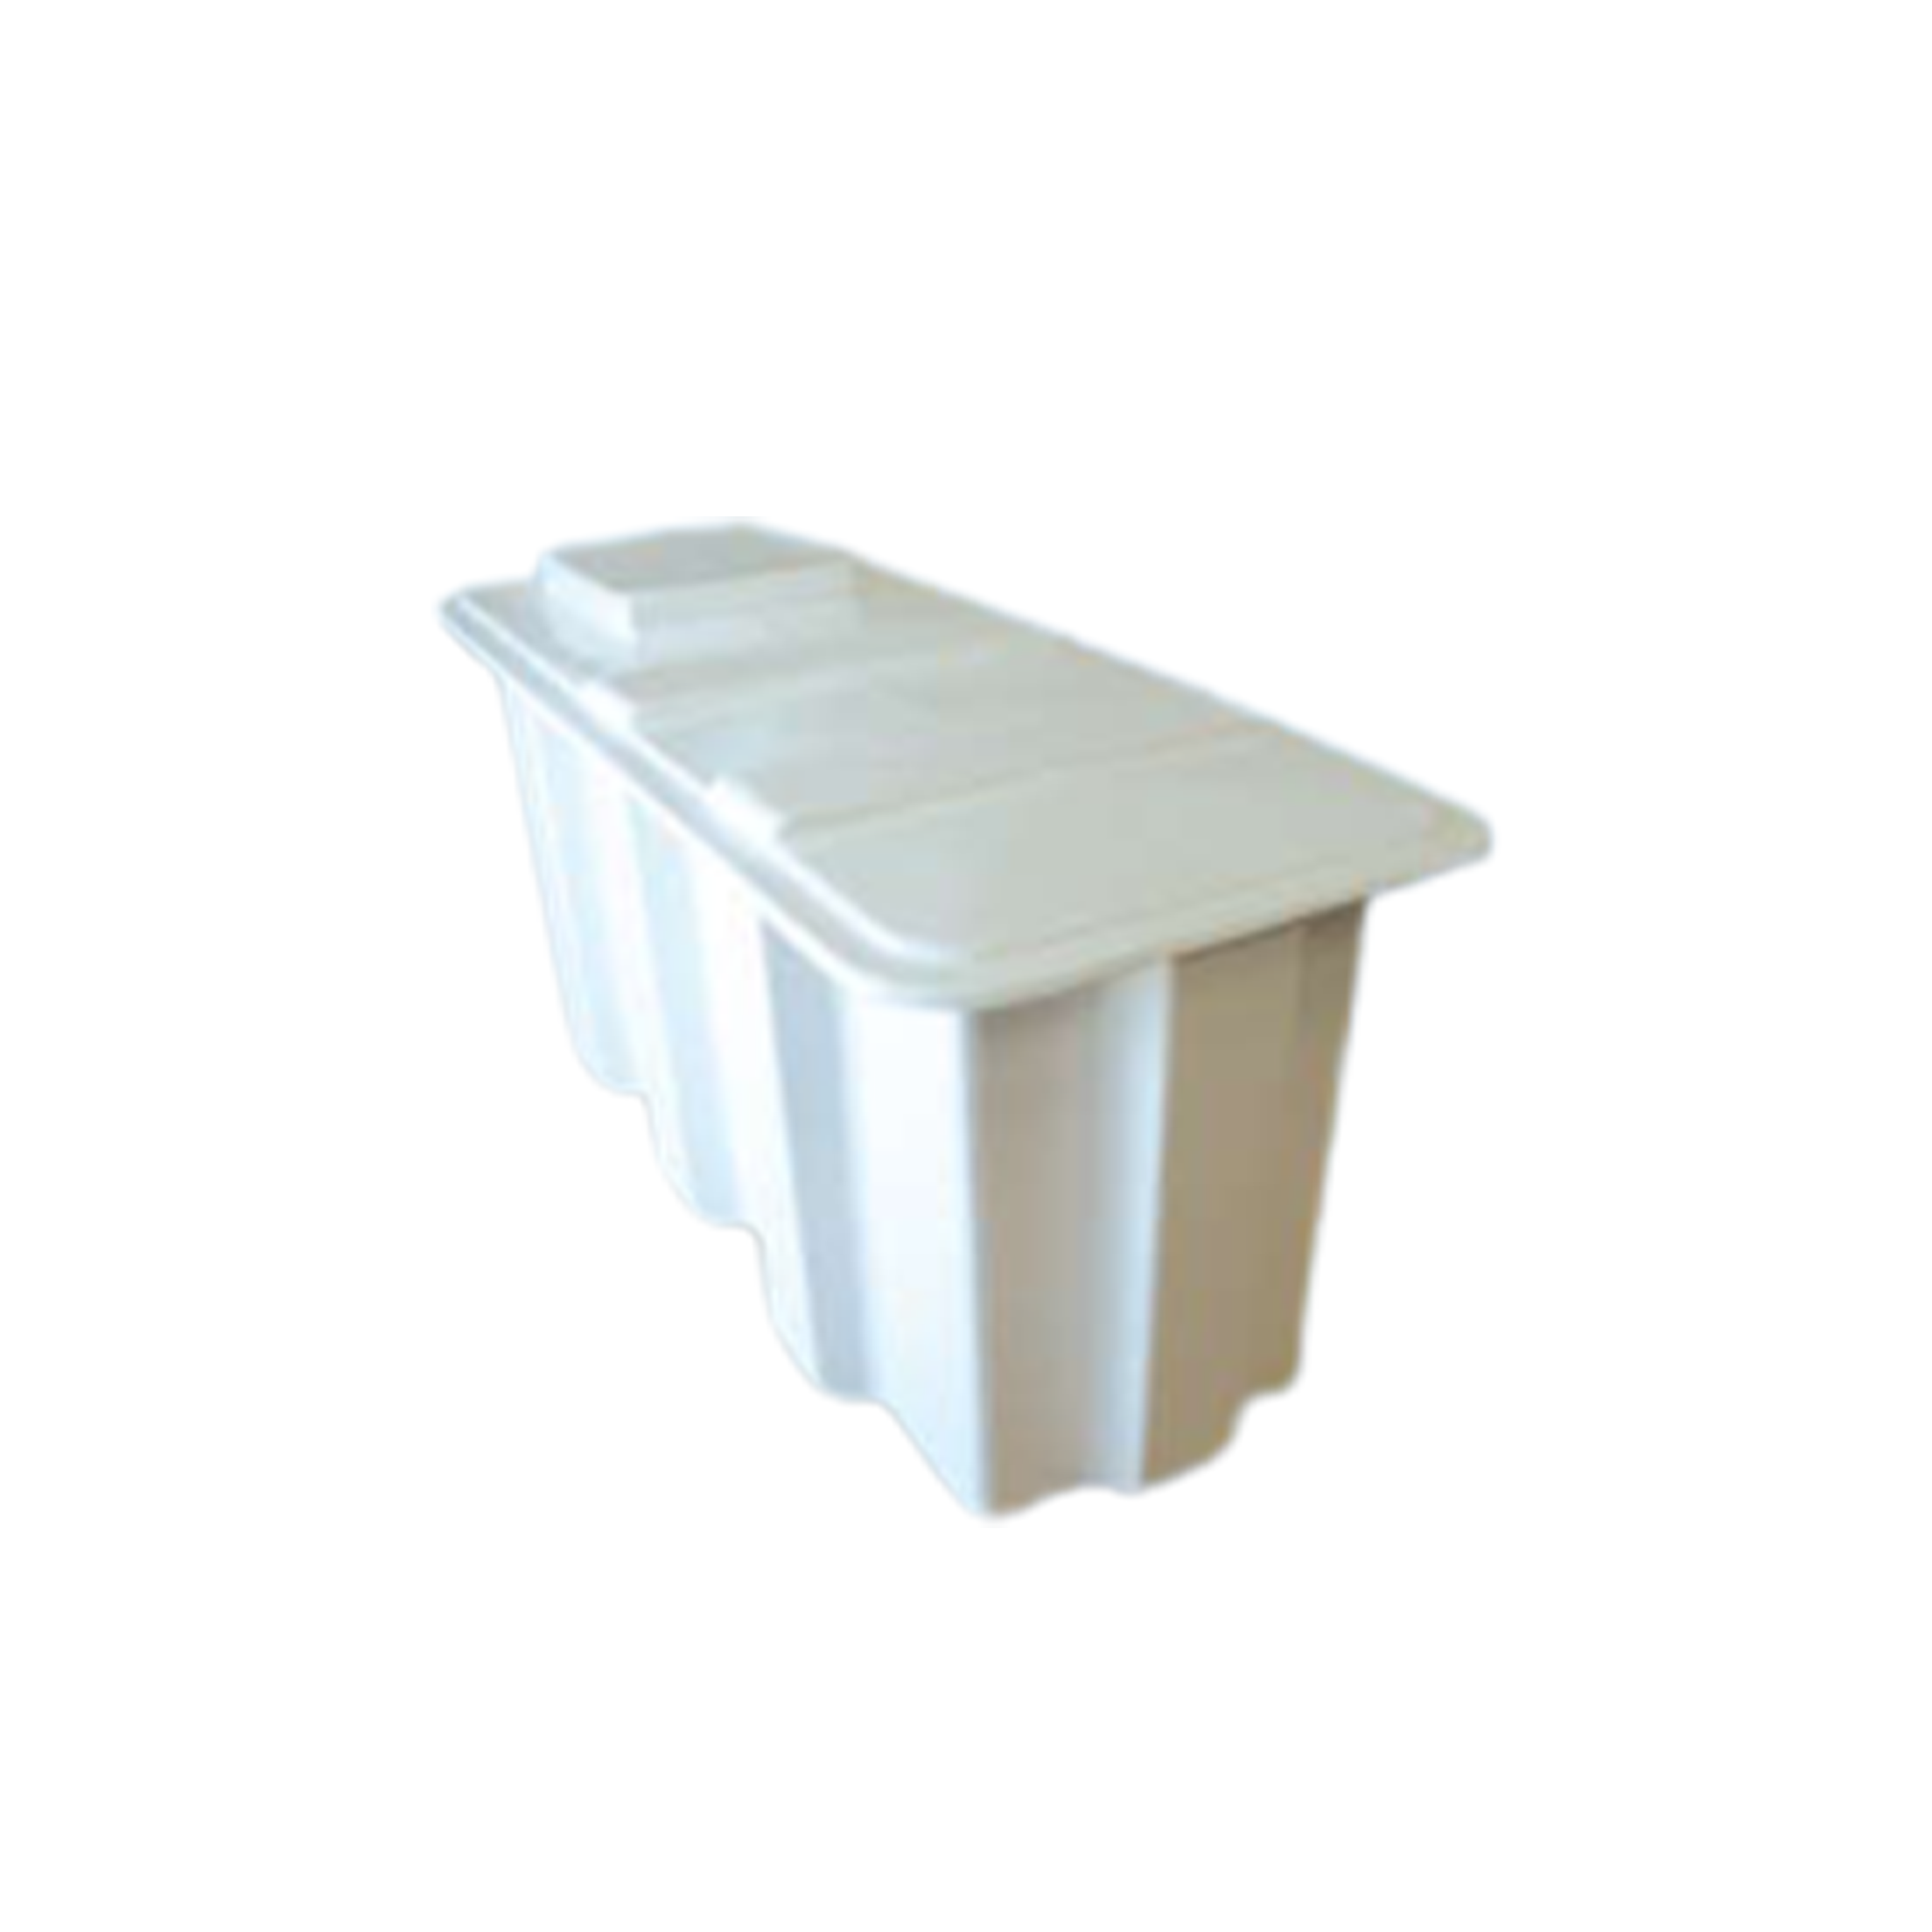 Buy White Special Water Tank - 200gal Online | Construction Finishes | Qetaat.com